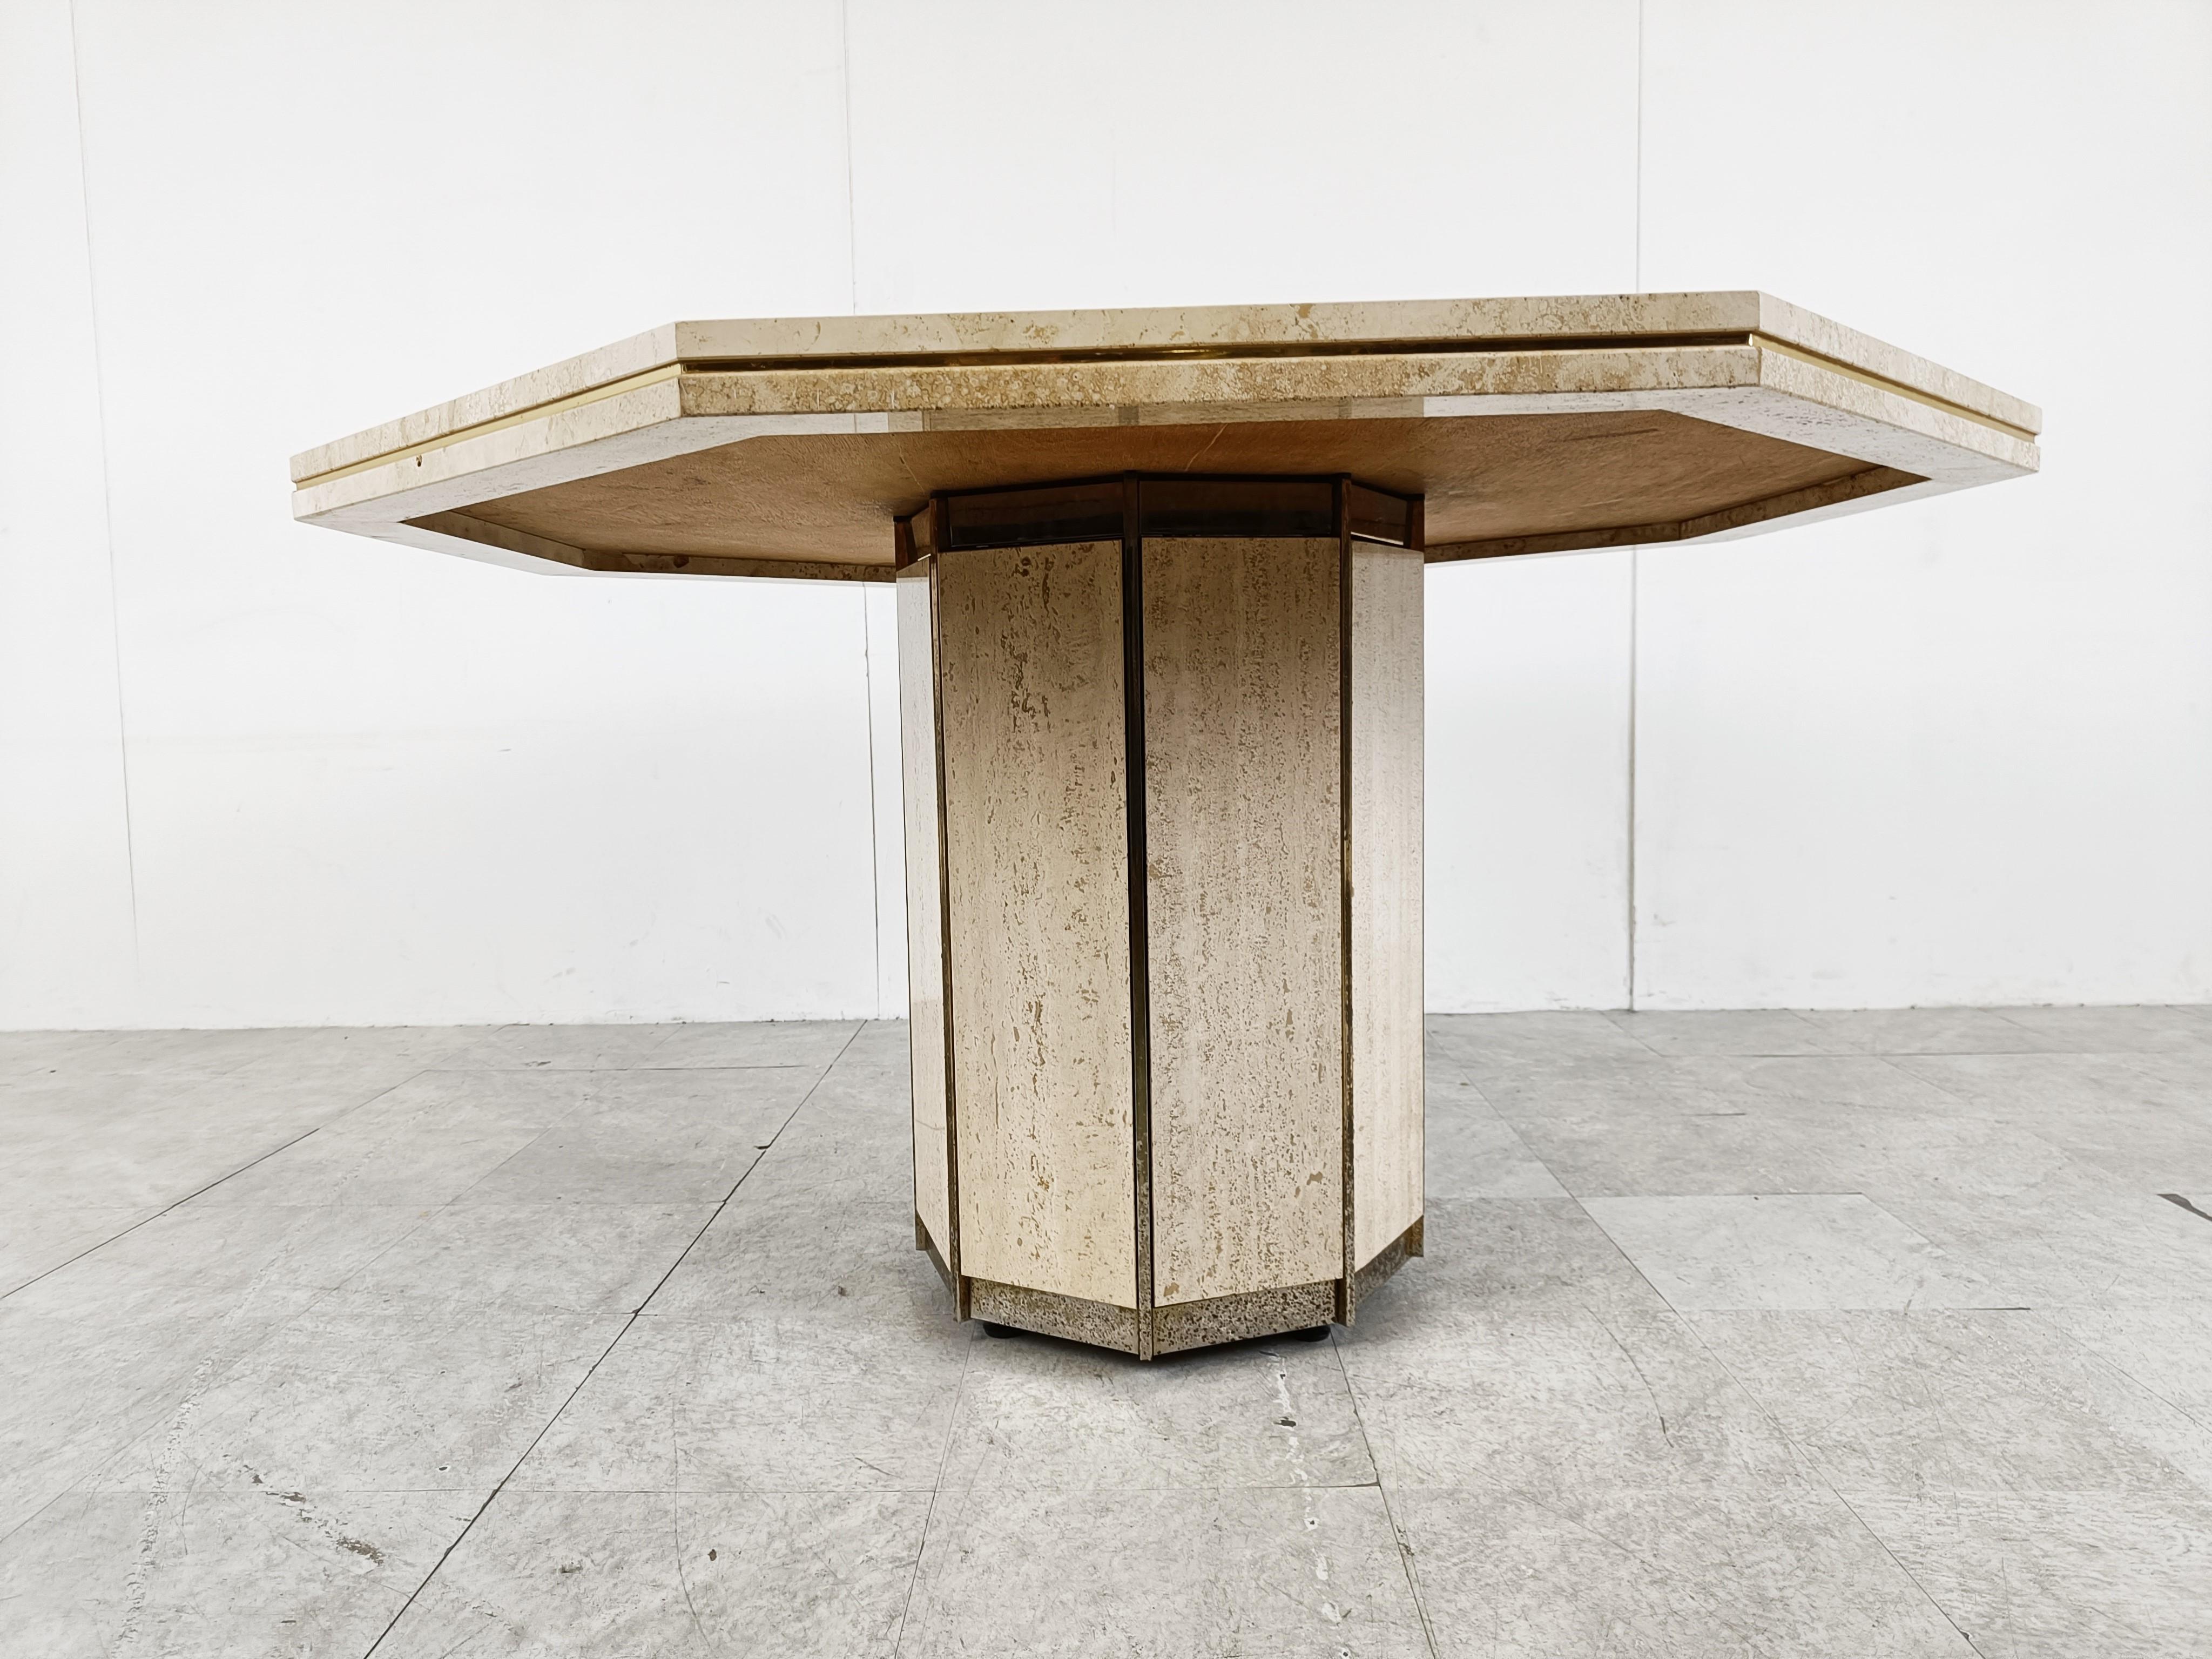 Octogonal Italian Travertine and Brass Dining Table, 1970s For Sale 1